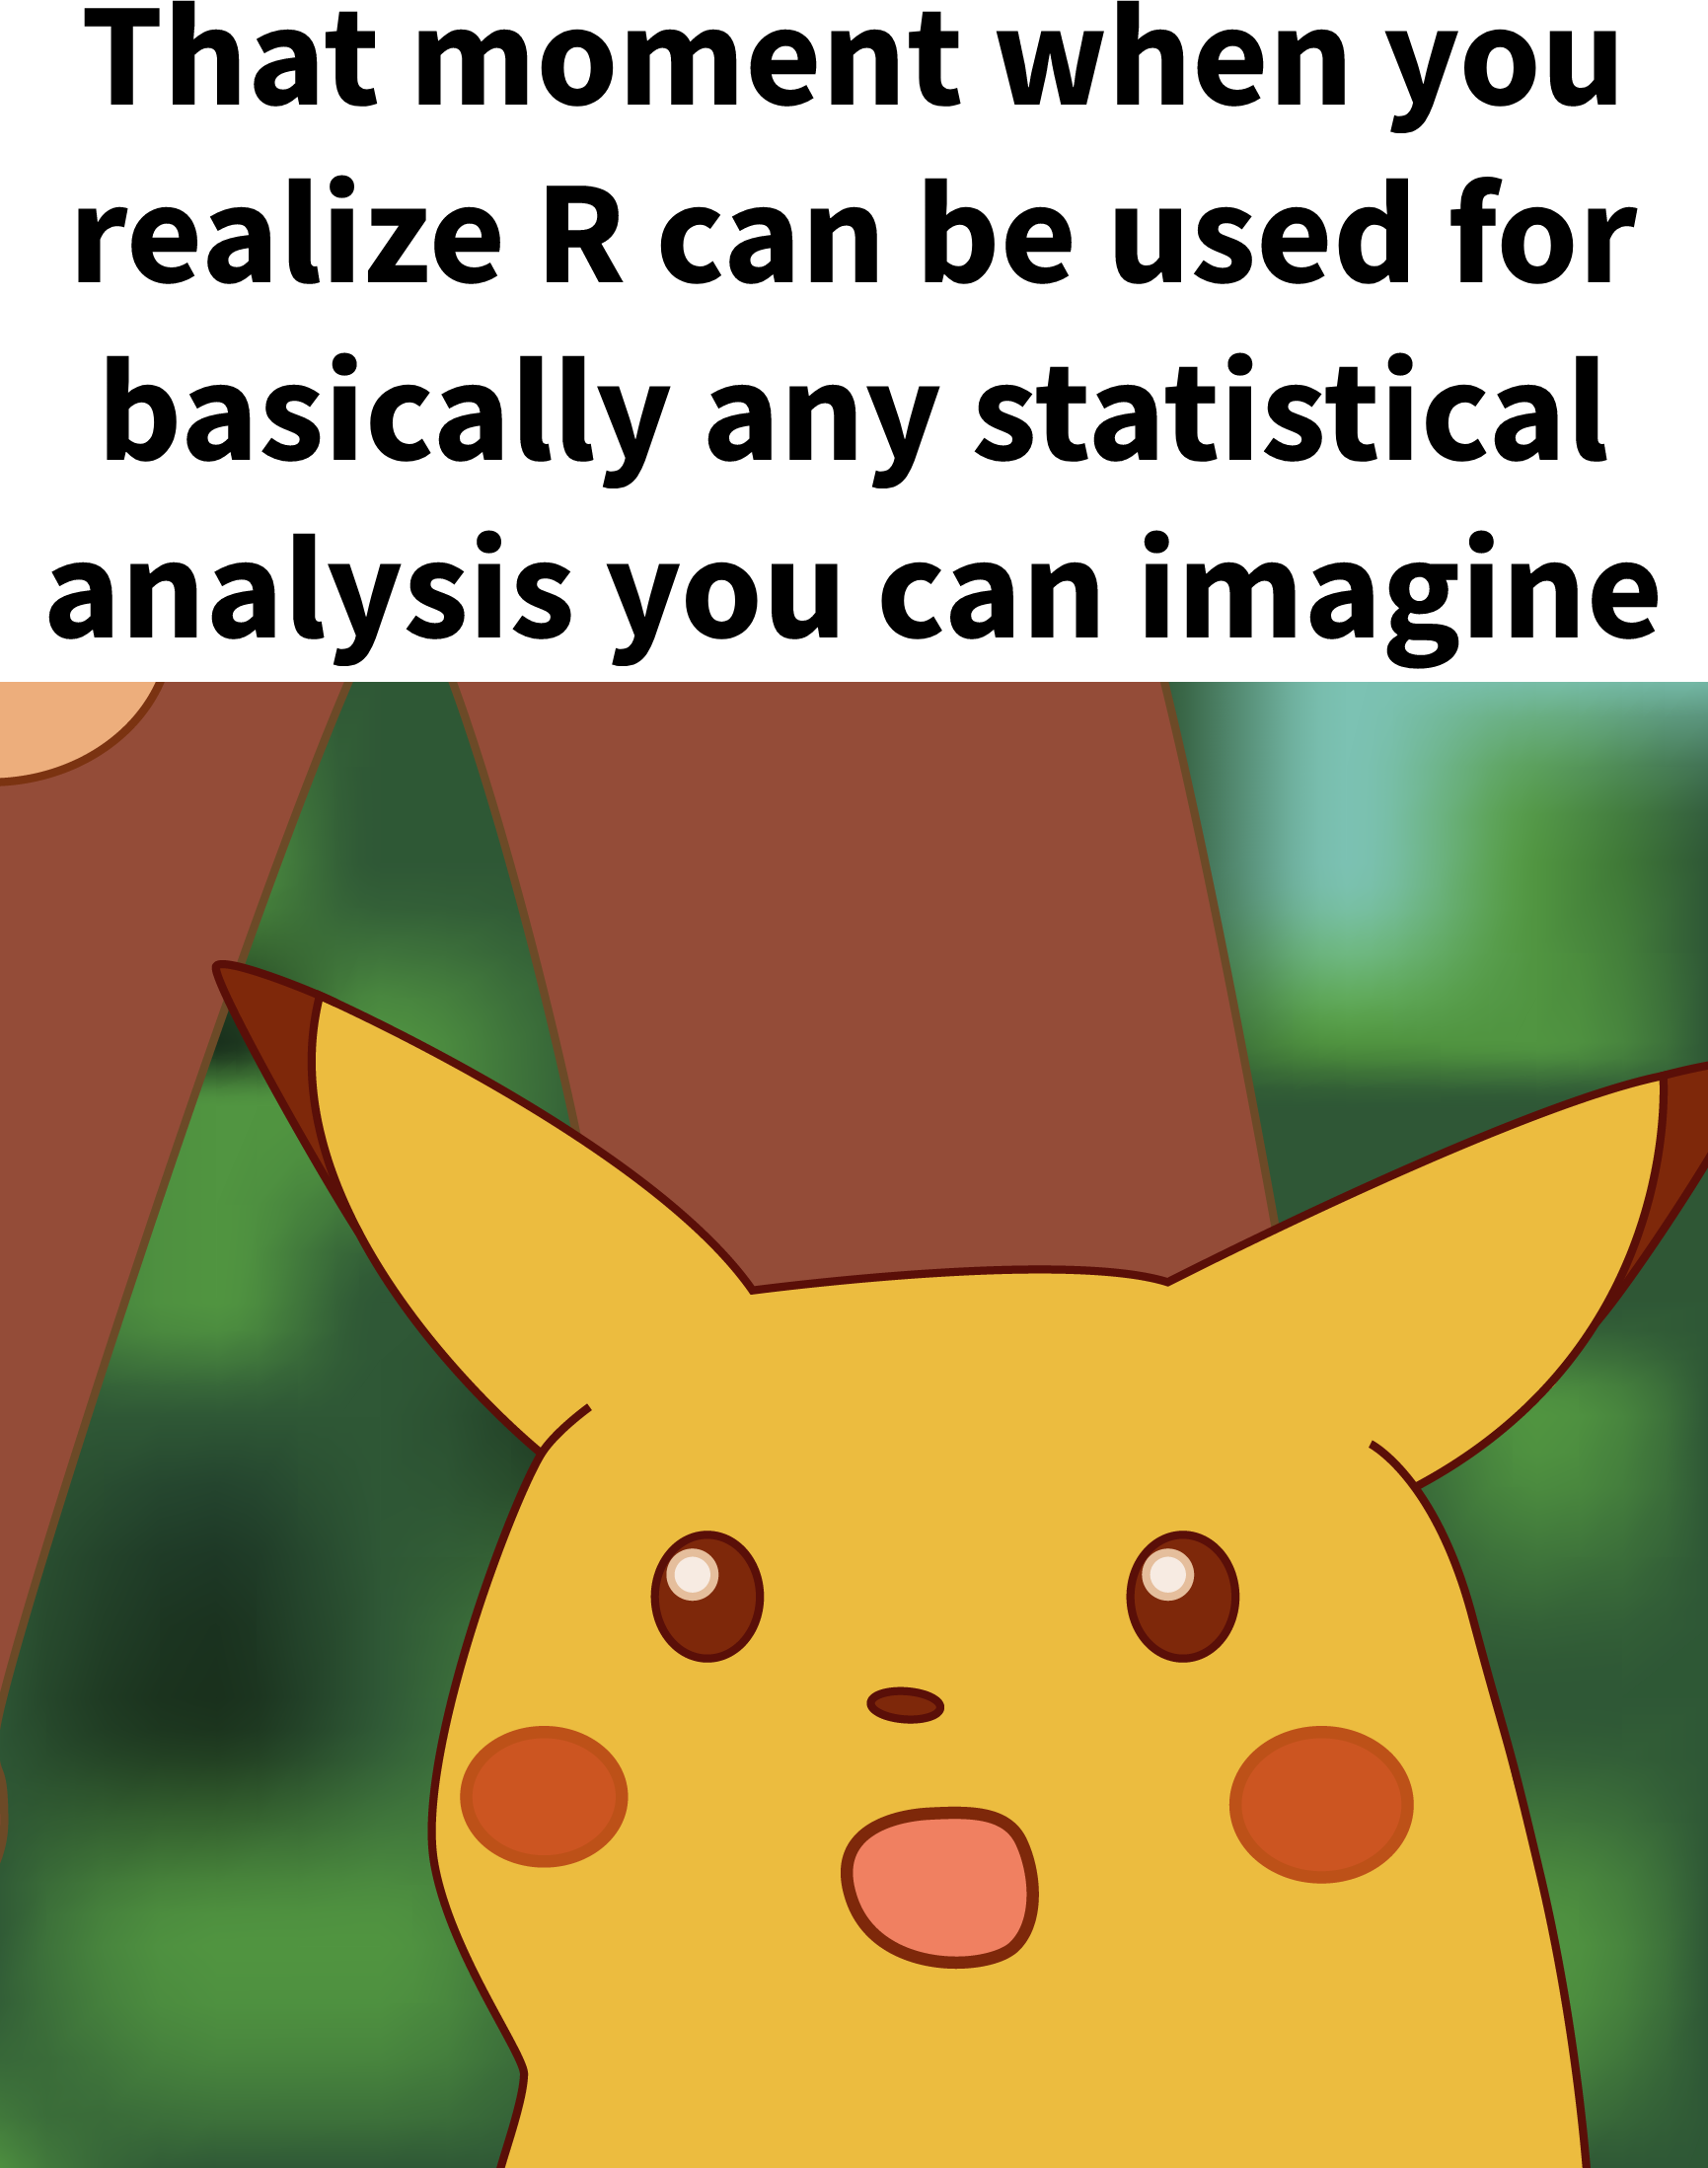 That moment when you realize R can be used for basically any statistical analysis you can imagine, shocked pikachu meme